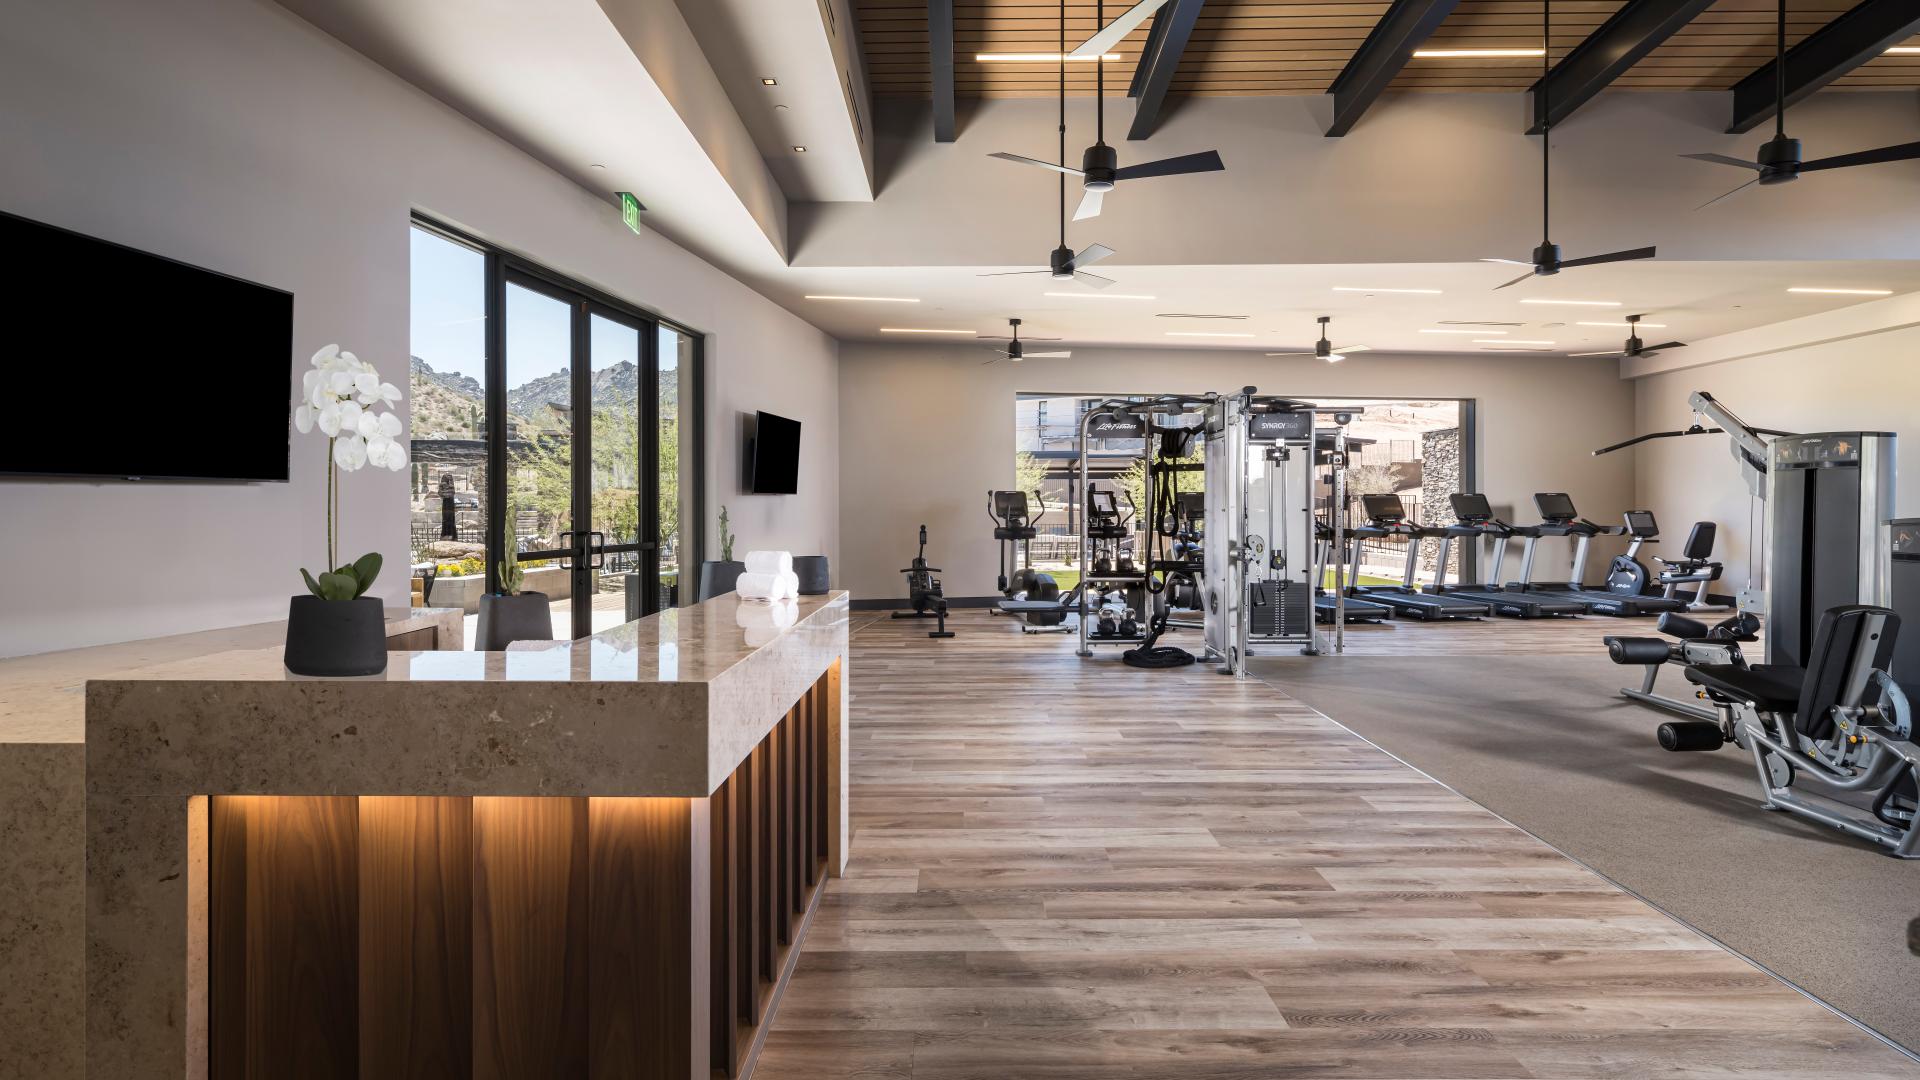 State-of-the-art fitness center overlooking the McDowell Mountains